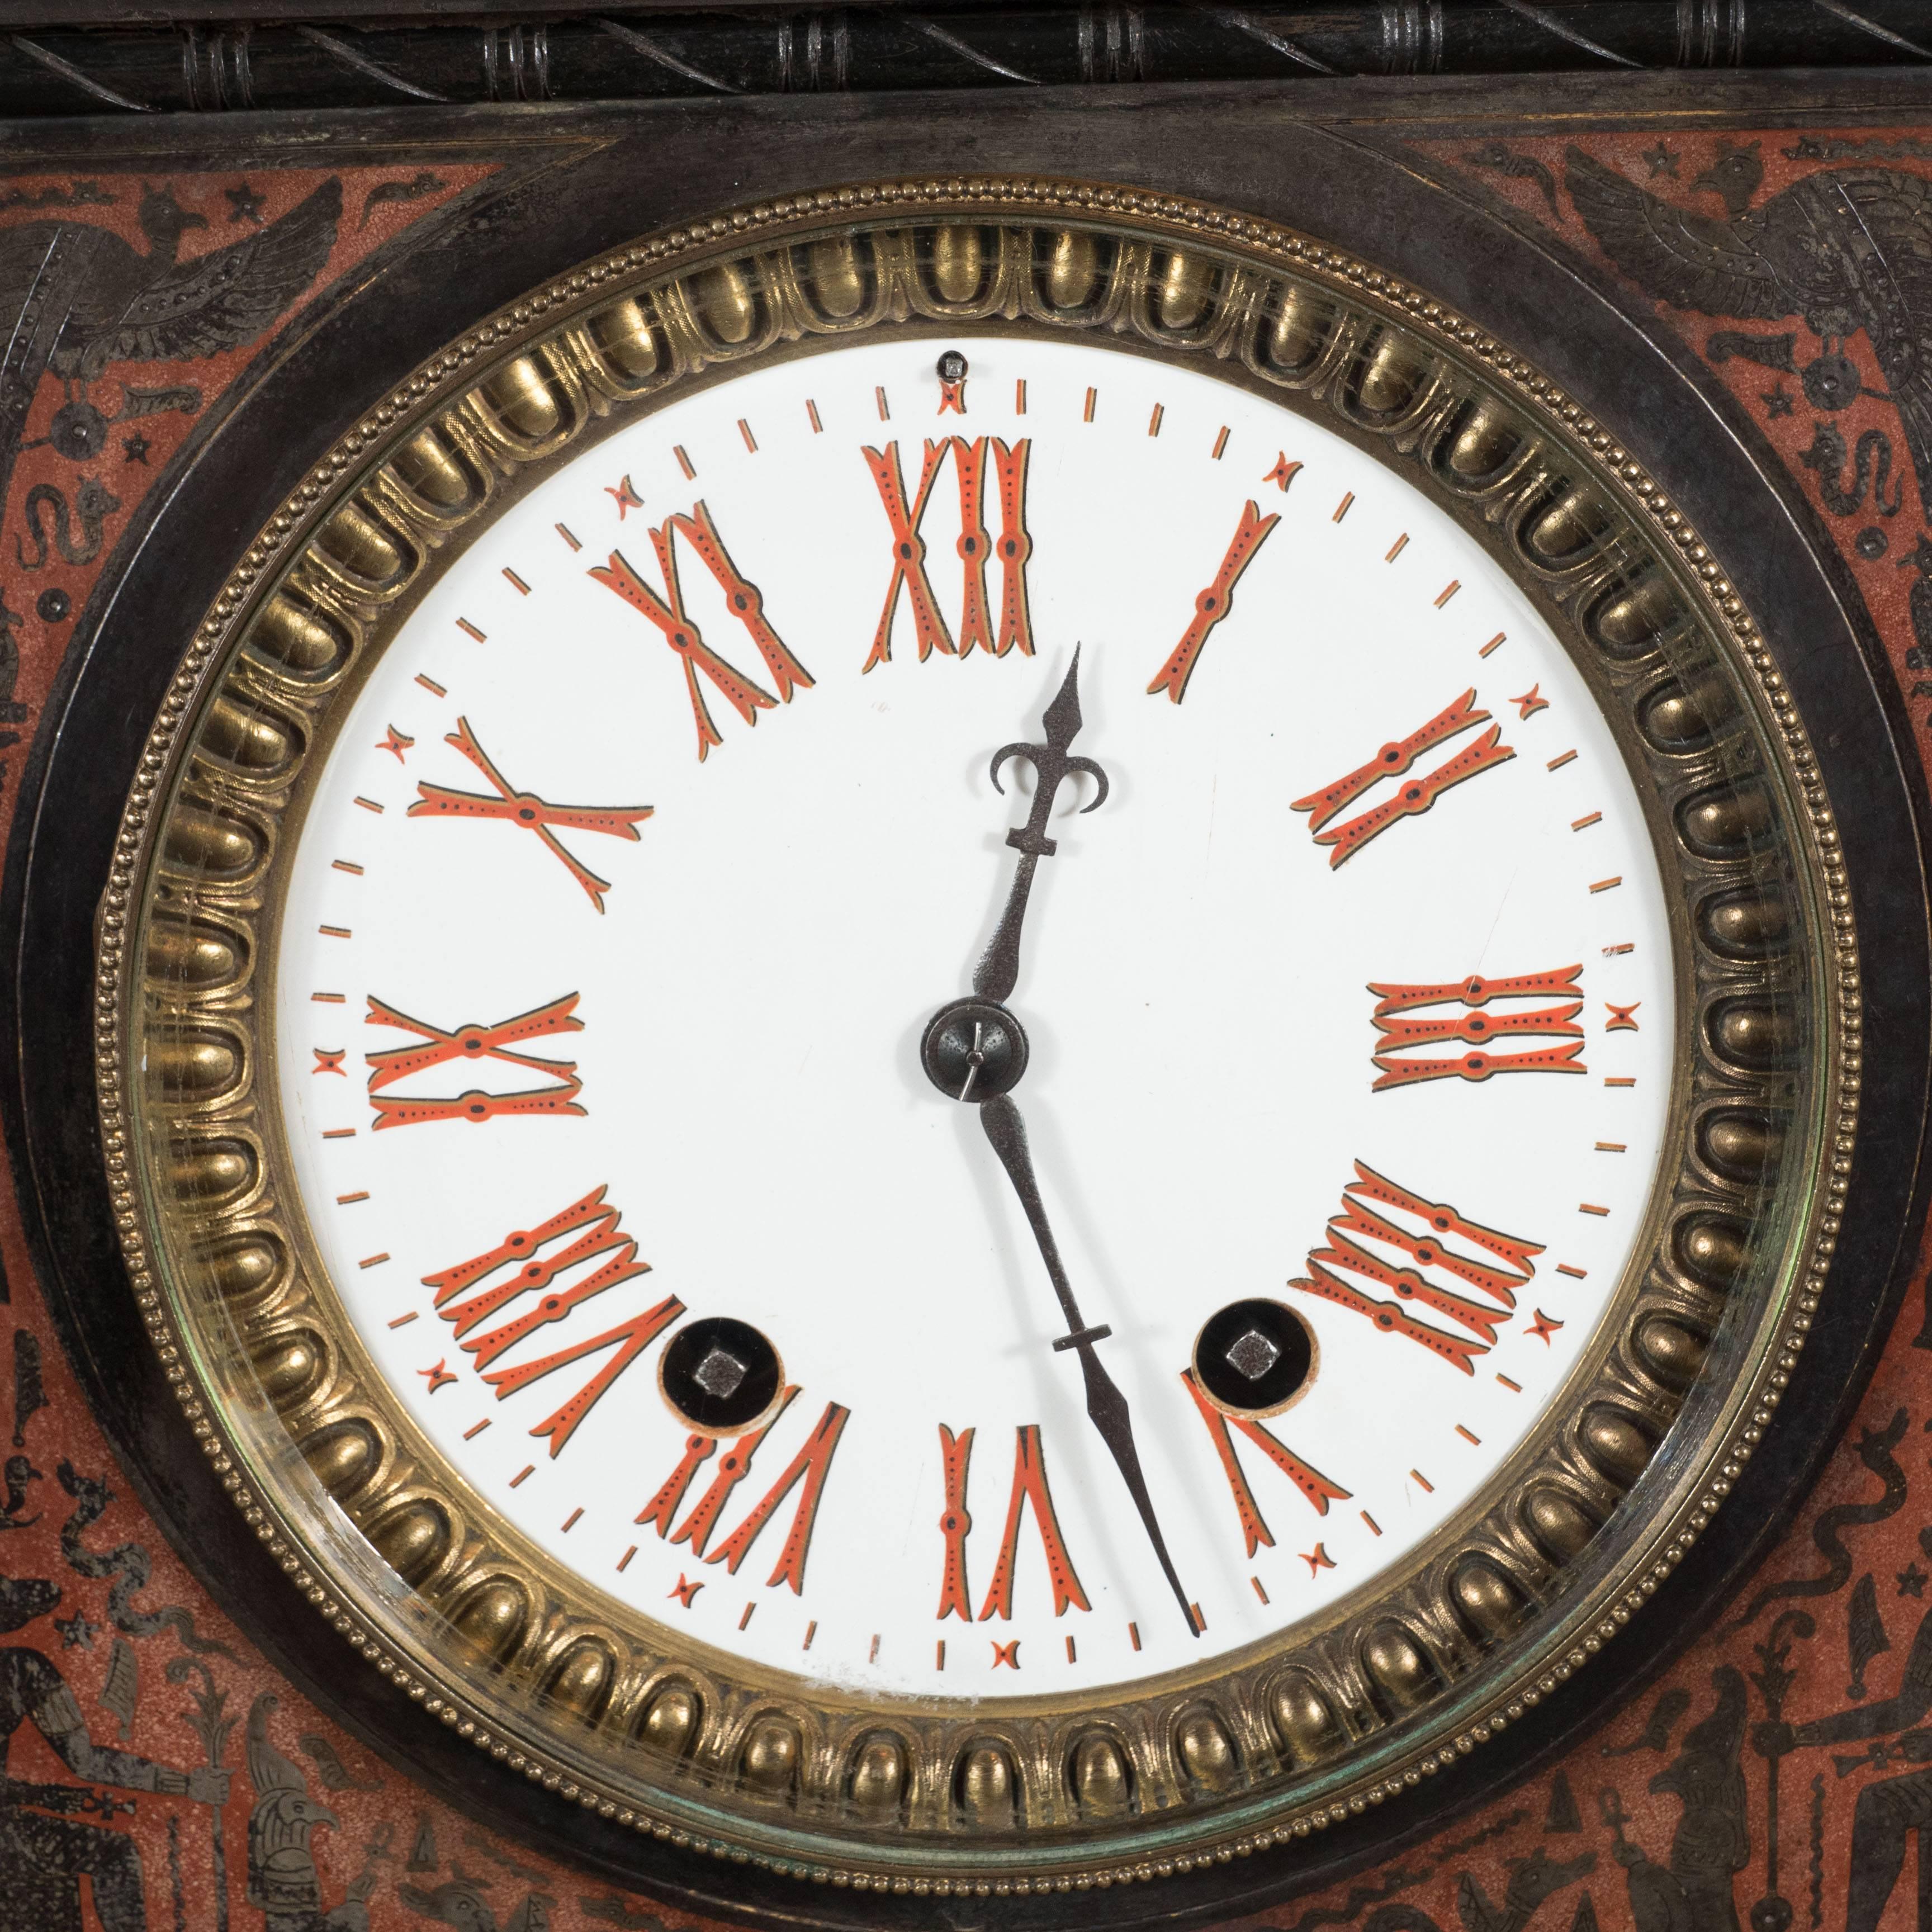 This exceptional mantel clock features a fine quality French bronze-mounted clock in the Assyrian Revival style. It is made of hand-carved black marble with carved and incised hieroglyphics in a rich garnet .This is an outstanding piece with its